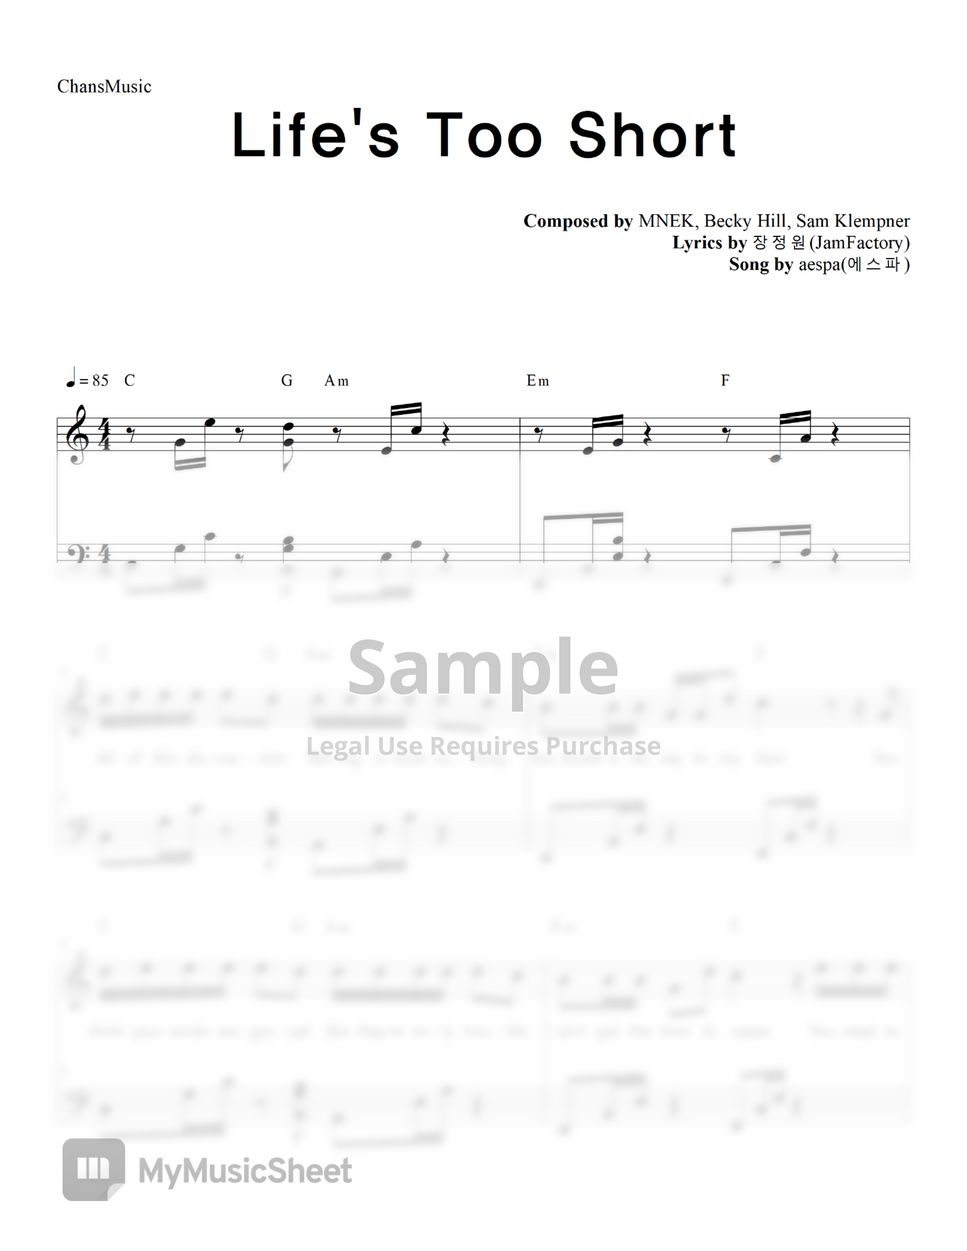 aespa - Life's Too Short (with Lyrics) by ChansMusic